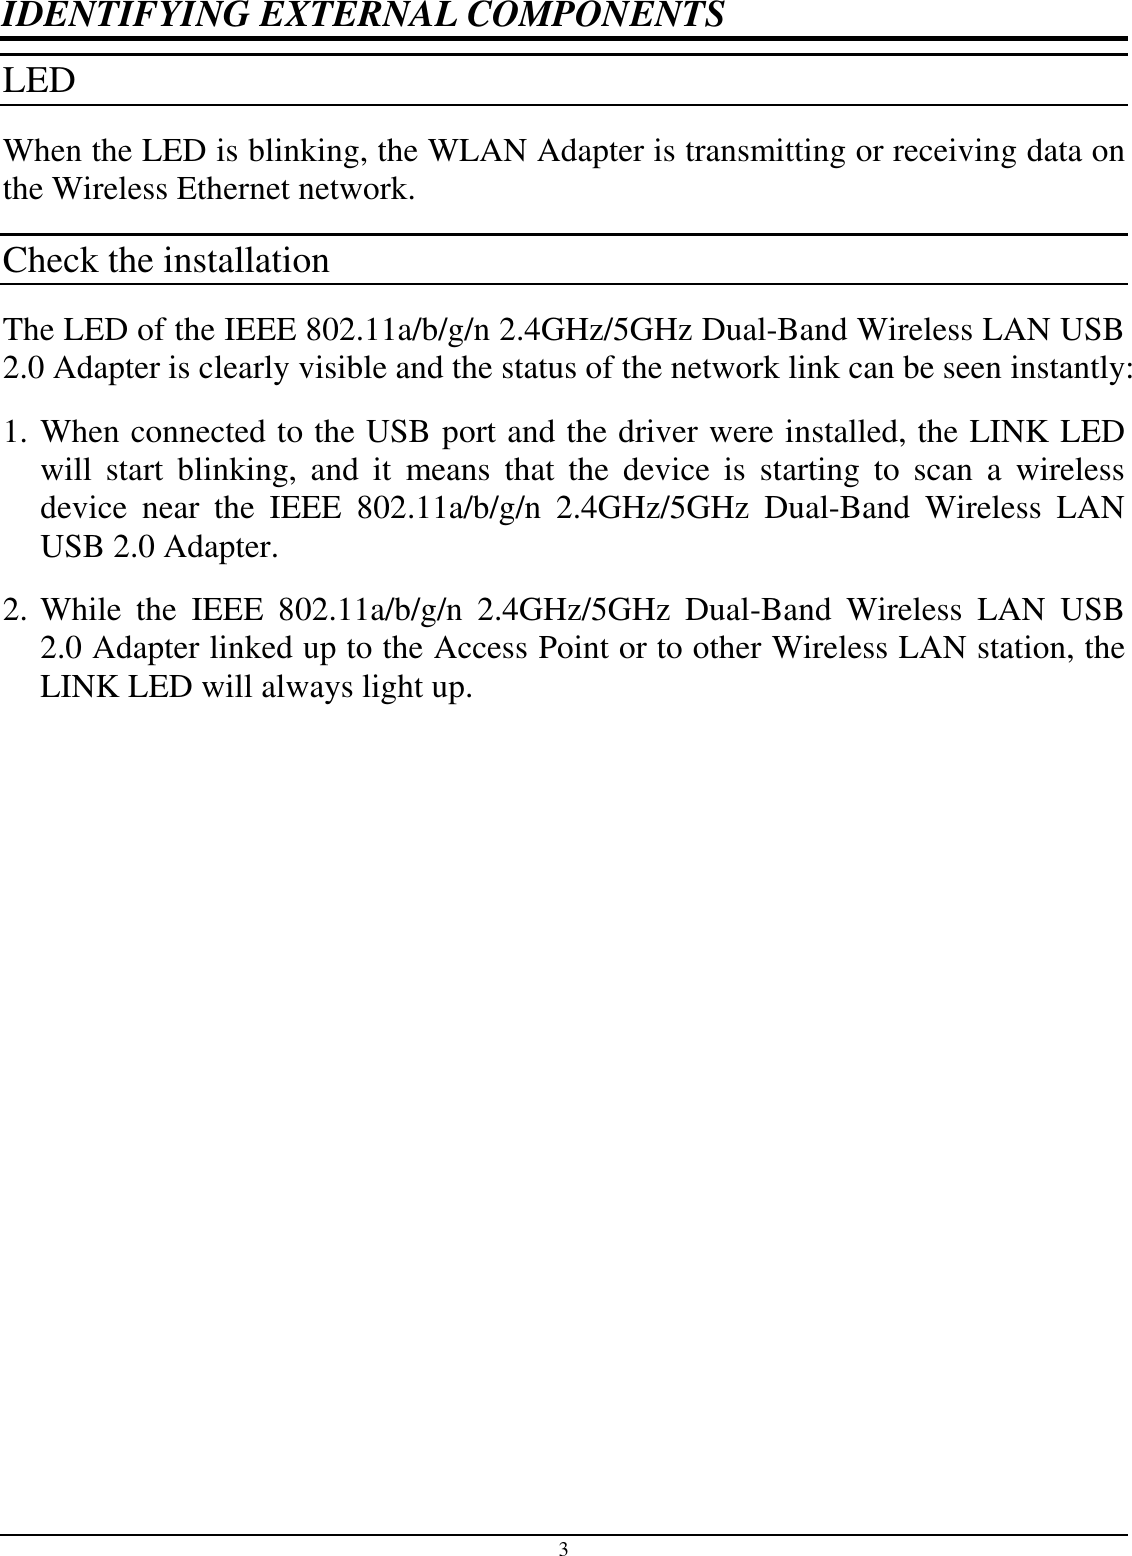 3 IDENTIFYING EXTERNAL COMPONENTS LED  When the LED is blinking, the WLAN Adapter is transmitting or receiving data on the Wireless Ethernet network. Check the installation The LED of the IEEE 802.11a/b/g/n 2.4GHz/5GHz Dual-Band Wireless LAN USB 2.0 Adapter is clearly visible and the status of the network link can be seen instantly: 1. When connected to the USB port and the driver were installed, the LINK LED will  start  blinking,  and  it  means  that  the  device  is  starting  to  scan  a  wireless device  near  the  IEEE  802.11a/b/g/n  2.4GHz/5GHz  Dual-Band  Wireless  LAN USB 2.0 Adapter. 2. While  the  IEEE  802.11a/b/g/n  2.4GHz/5GHz  Dual-Band  Wireless  LAN  USB 2.0 Adapter linked up to the Access Point or to other Wireless LAN station, the LINK LED will always light up.  